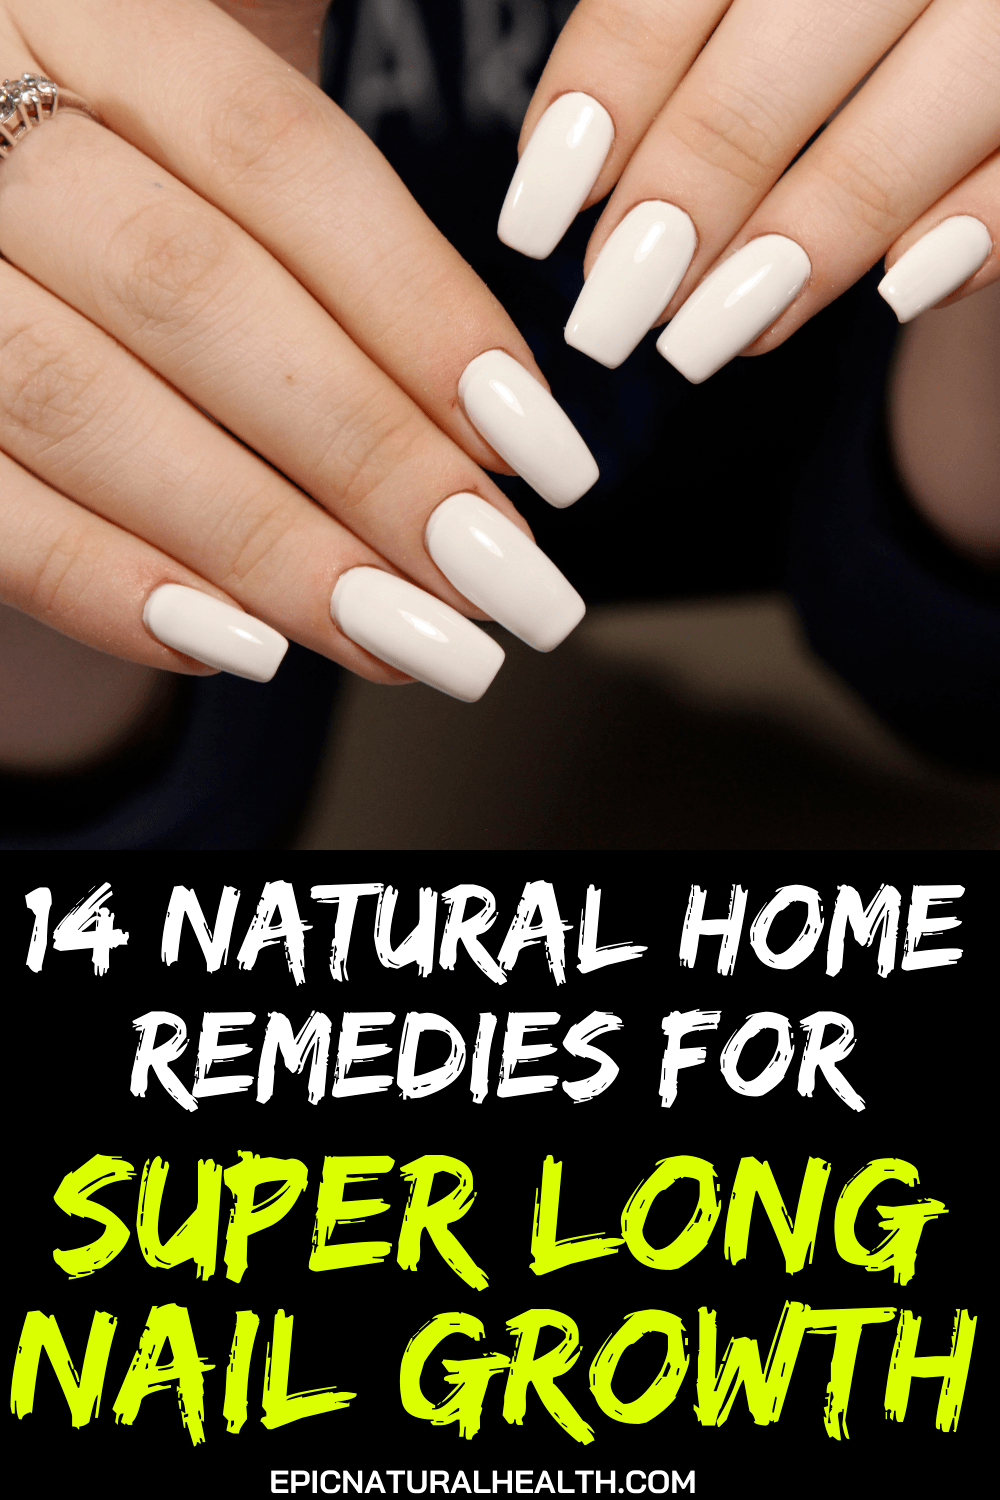 14 Natural Home Remedies for Super Long Nail Growth